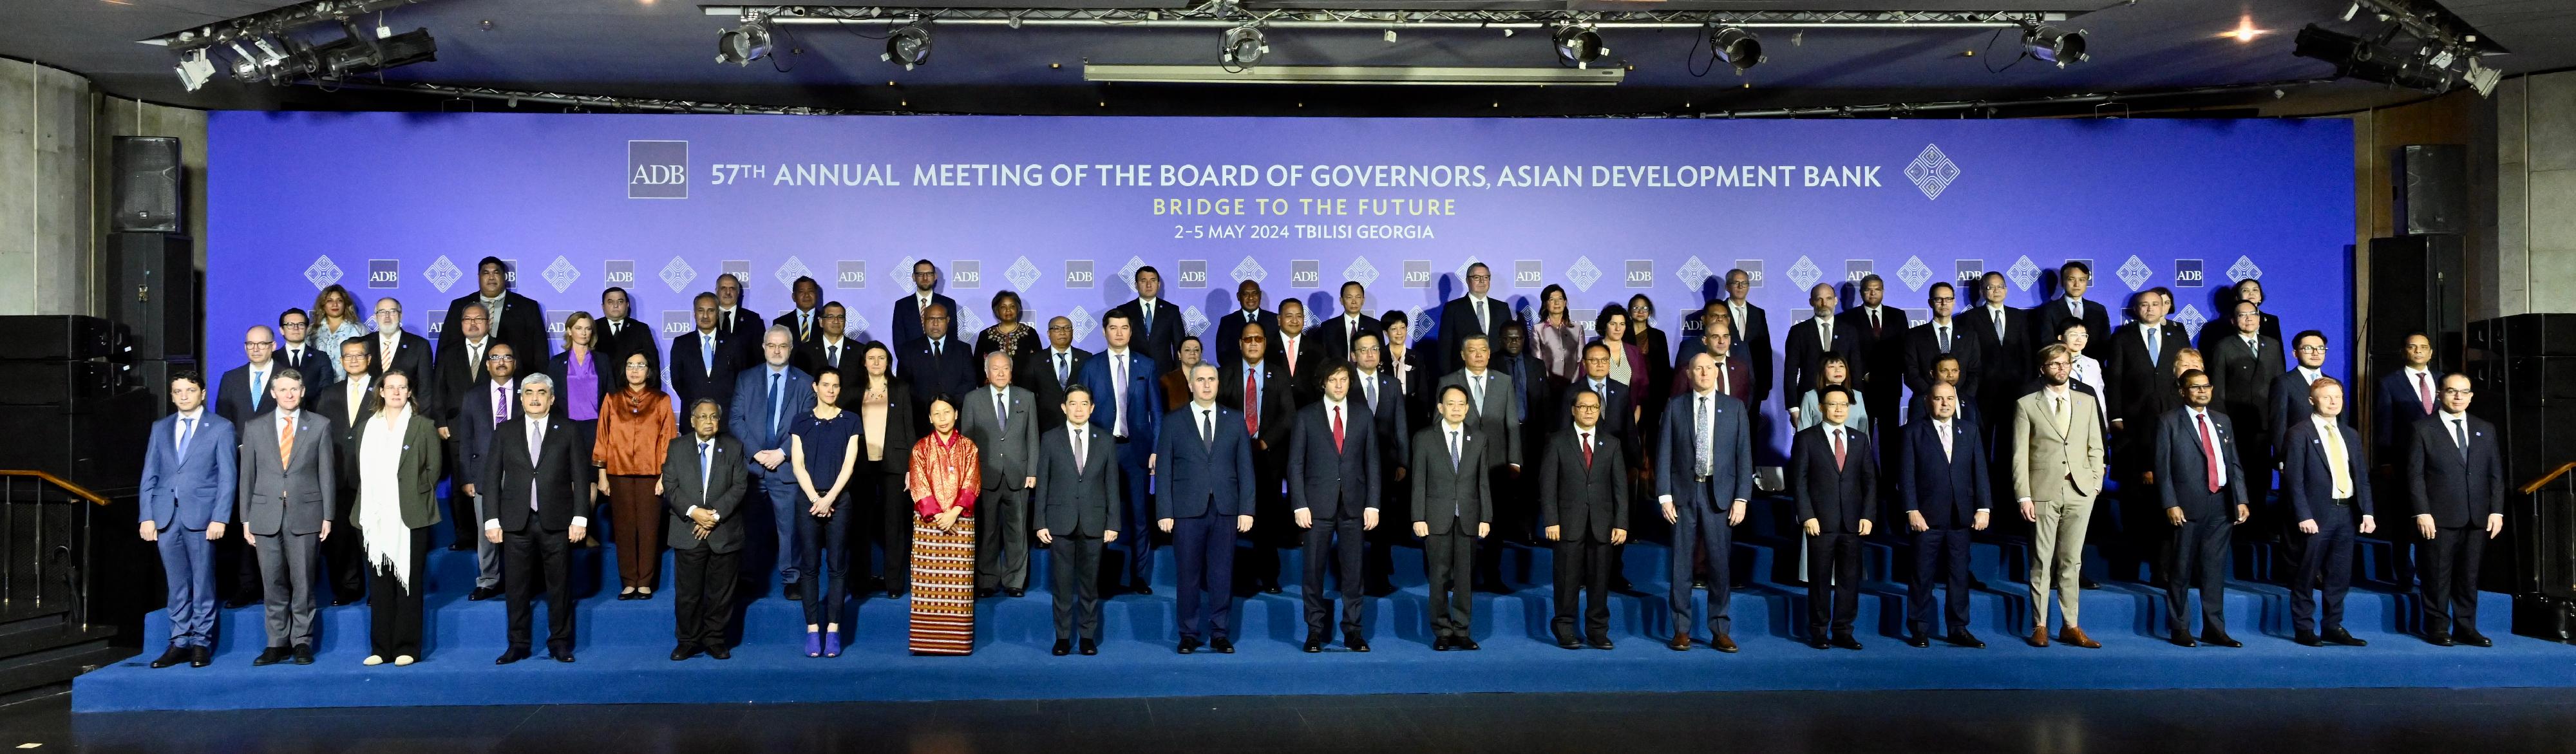 The Financial Secretary, Mr Paul Chan, continued his attendance yesterday (May 4, Tbilisi time) at the 57th Annual Meeting of the Board of Governors of the Asian Development Bank (ADB) in Tbilisi, Georgia. Photo shows Mr Chan (second row, second left); the Prime Minister of Georgia, Mr Irakli Kobakhidze (front row, centre); the President of the ADB, Mr Masatsugu Asakawa (front row, ninth right); and other governors of ADB and central banks at the meeting.